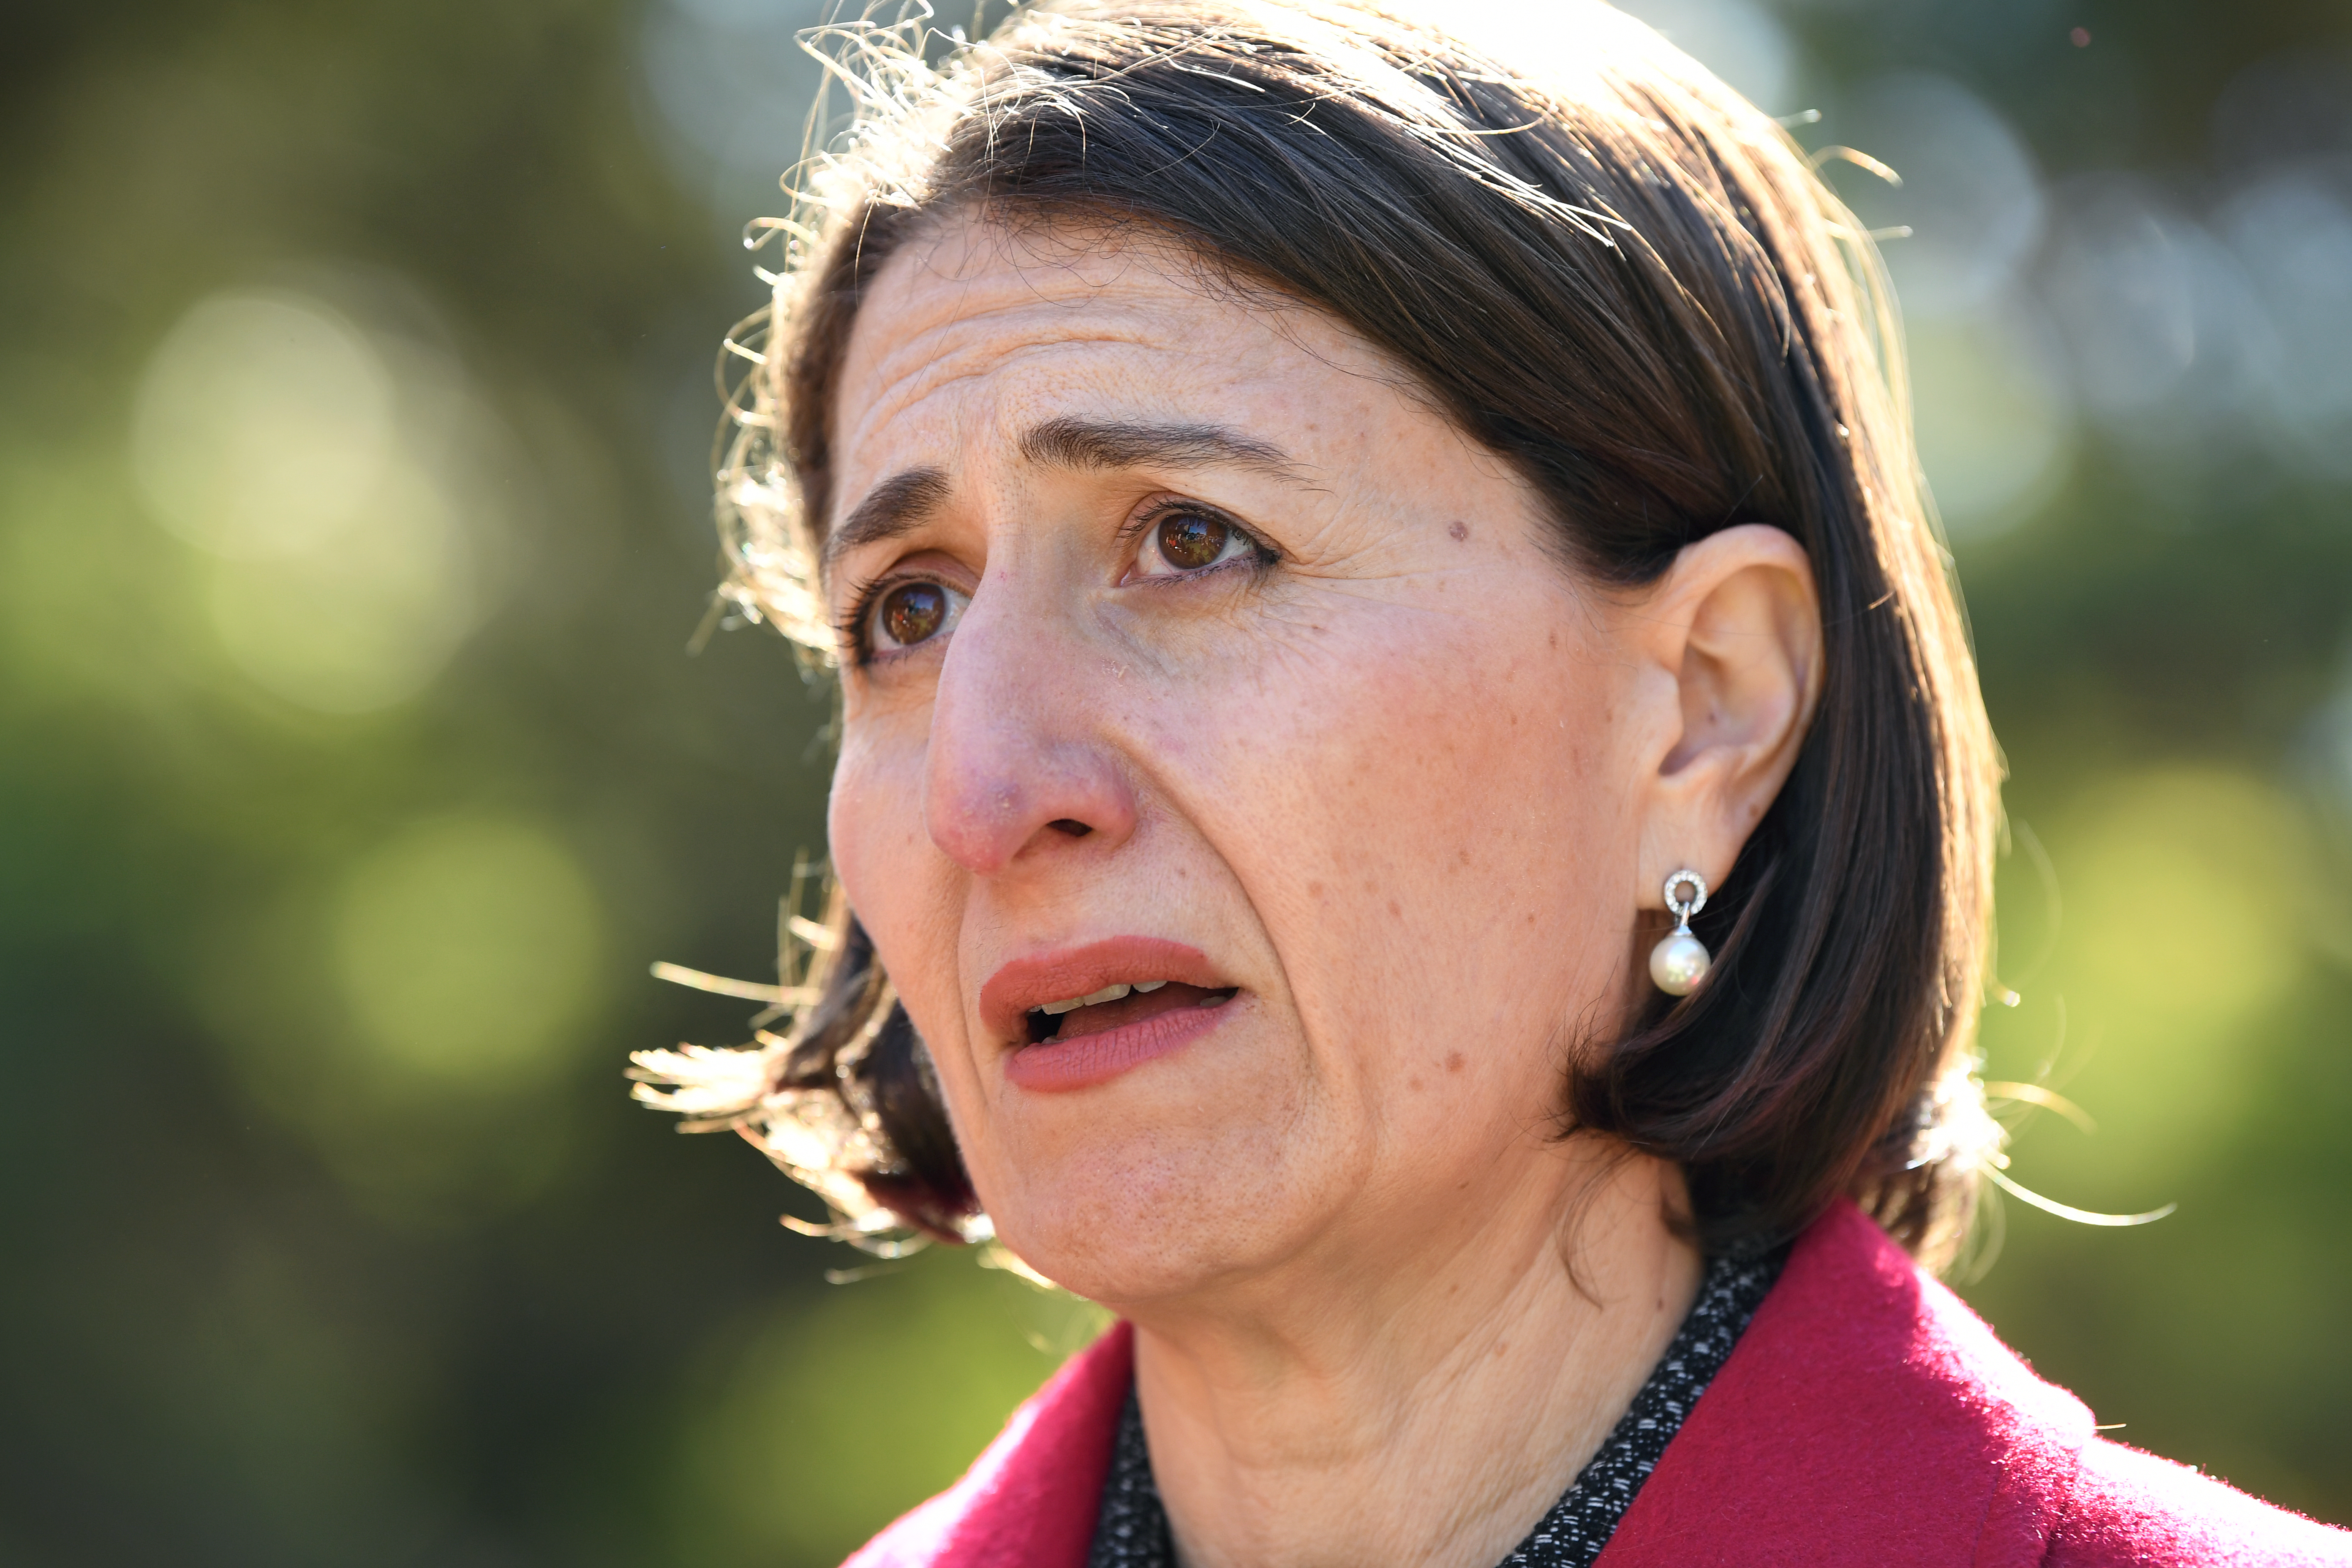 NSW Spill Cancelled As Berejiklian Relents To Conservative MPs On Abortion Bill